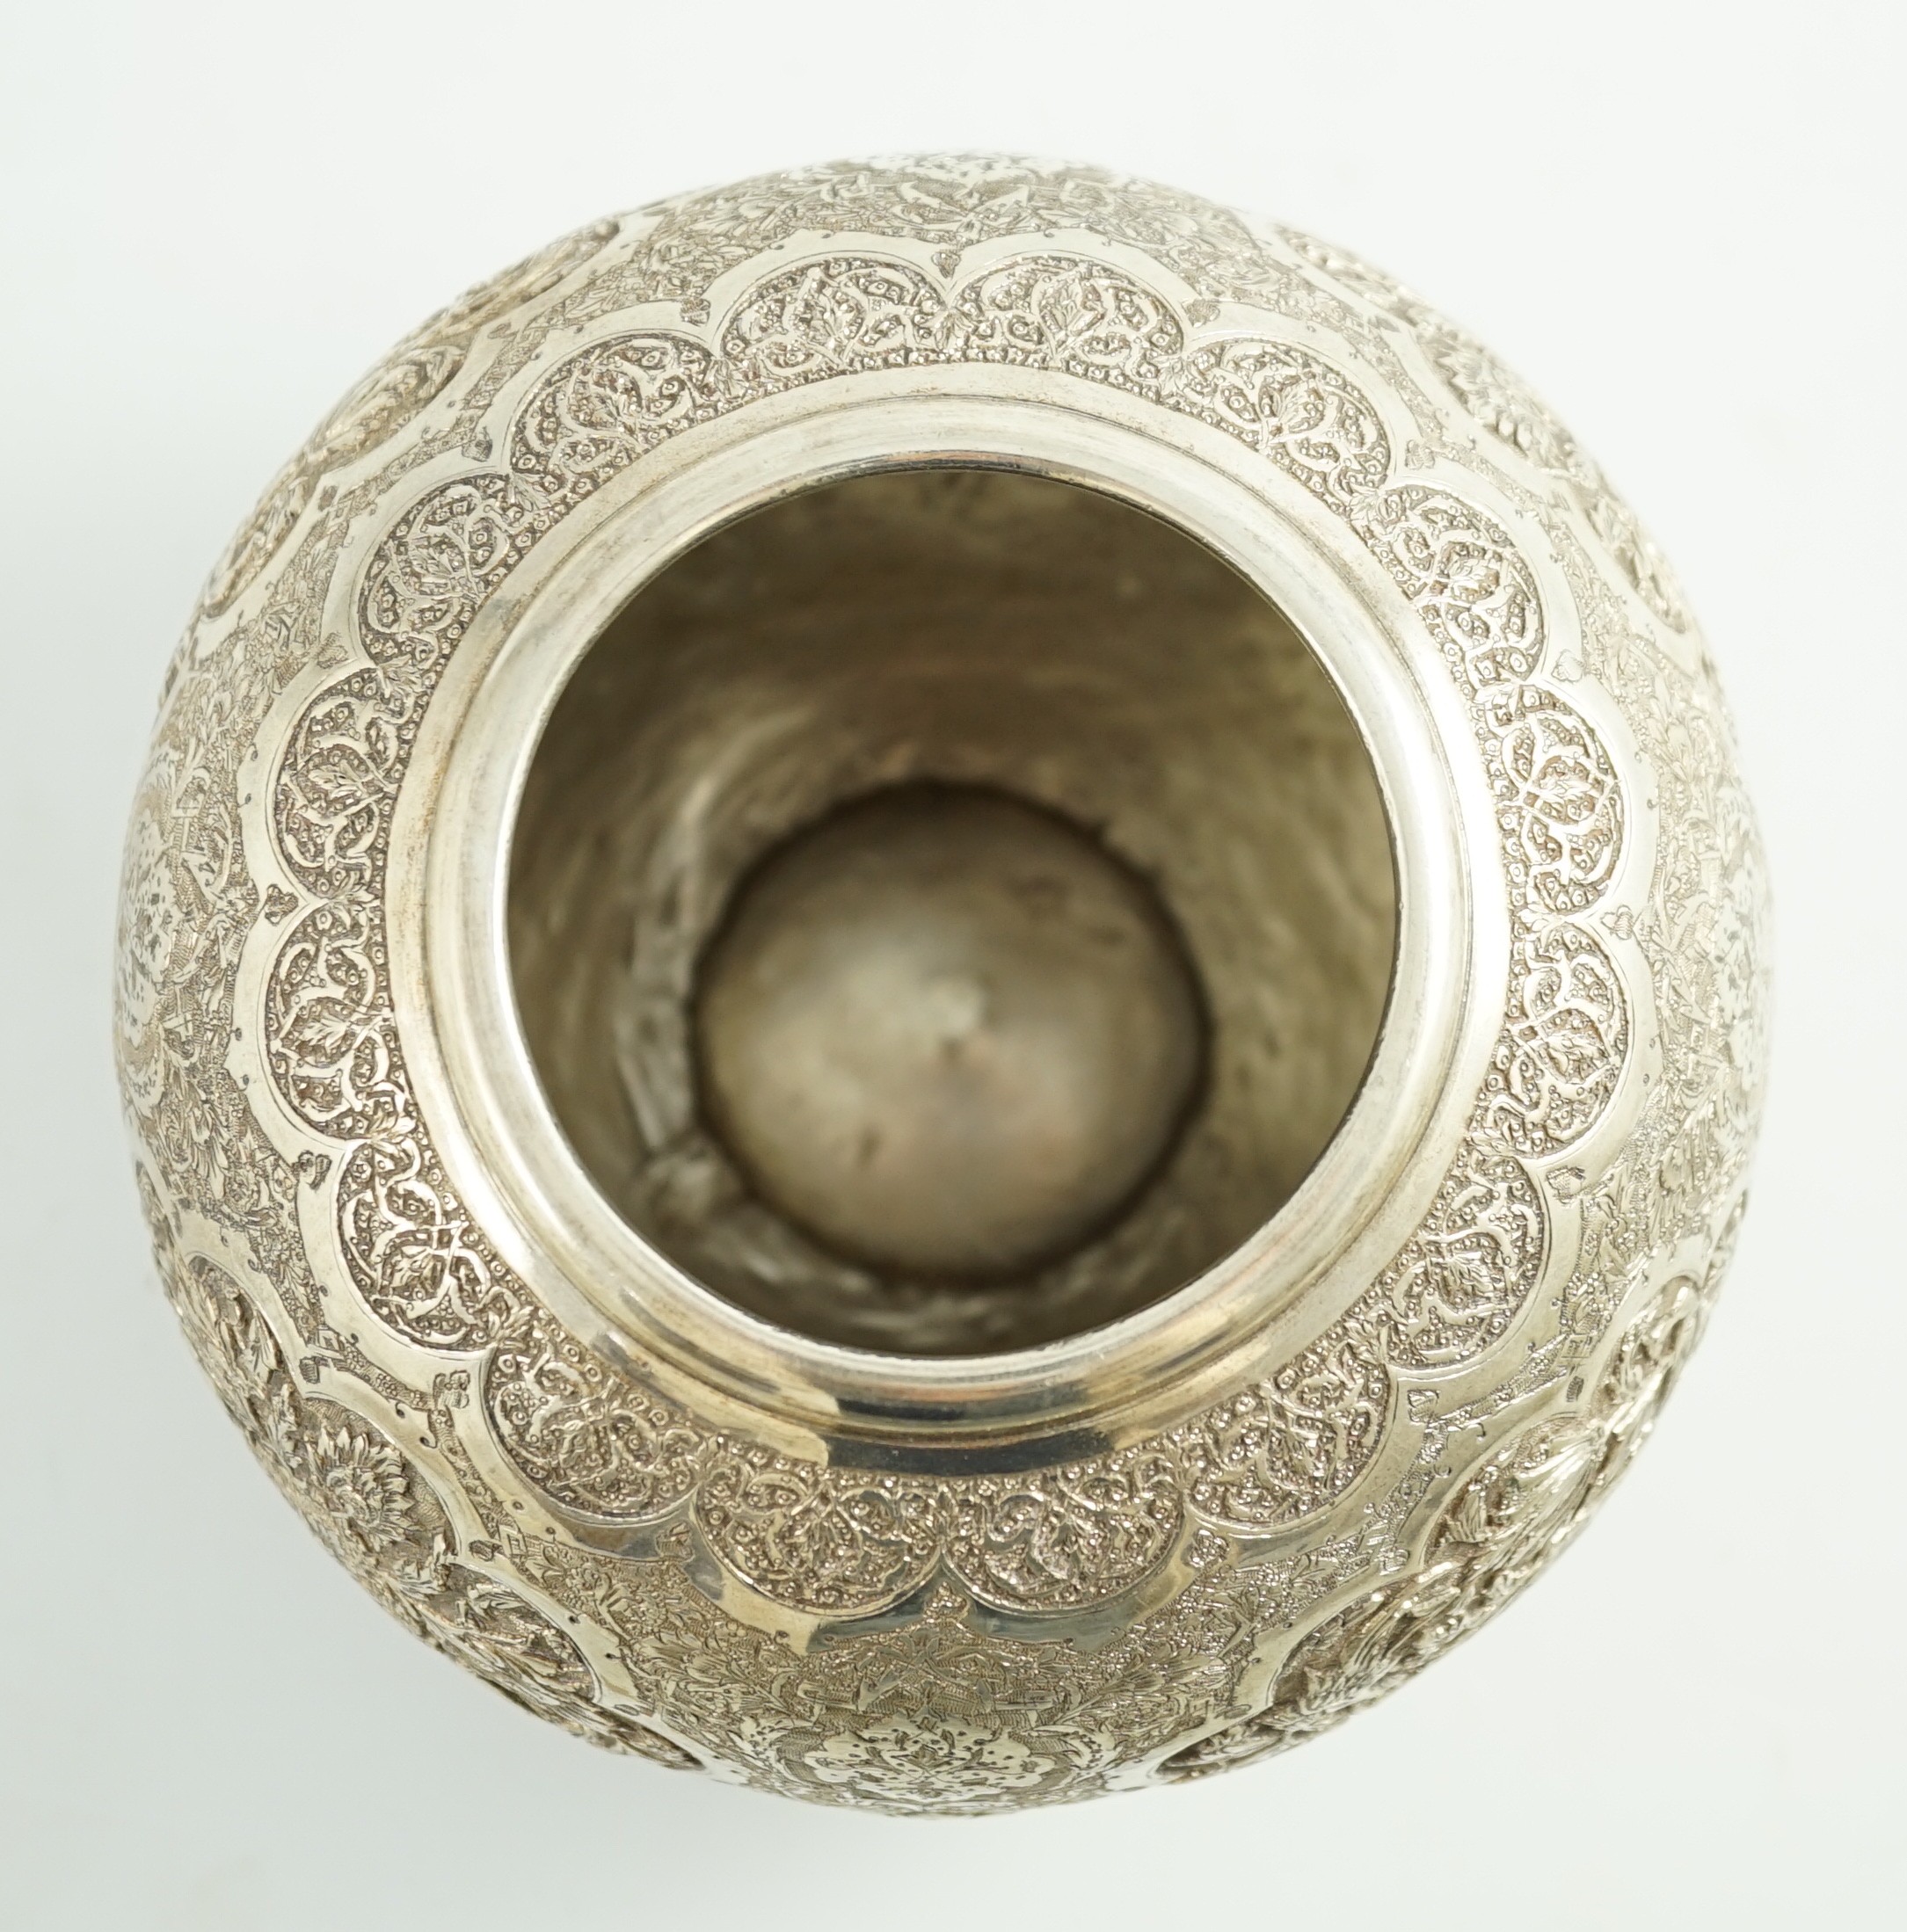 A 20th century Persian 84 standard embossed and engraved white metal vase, height 14cm, 17.4oz.